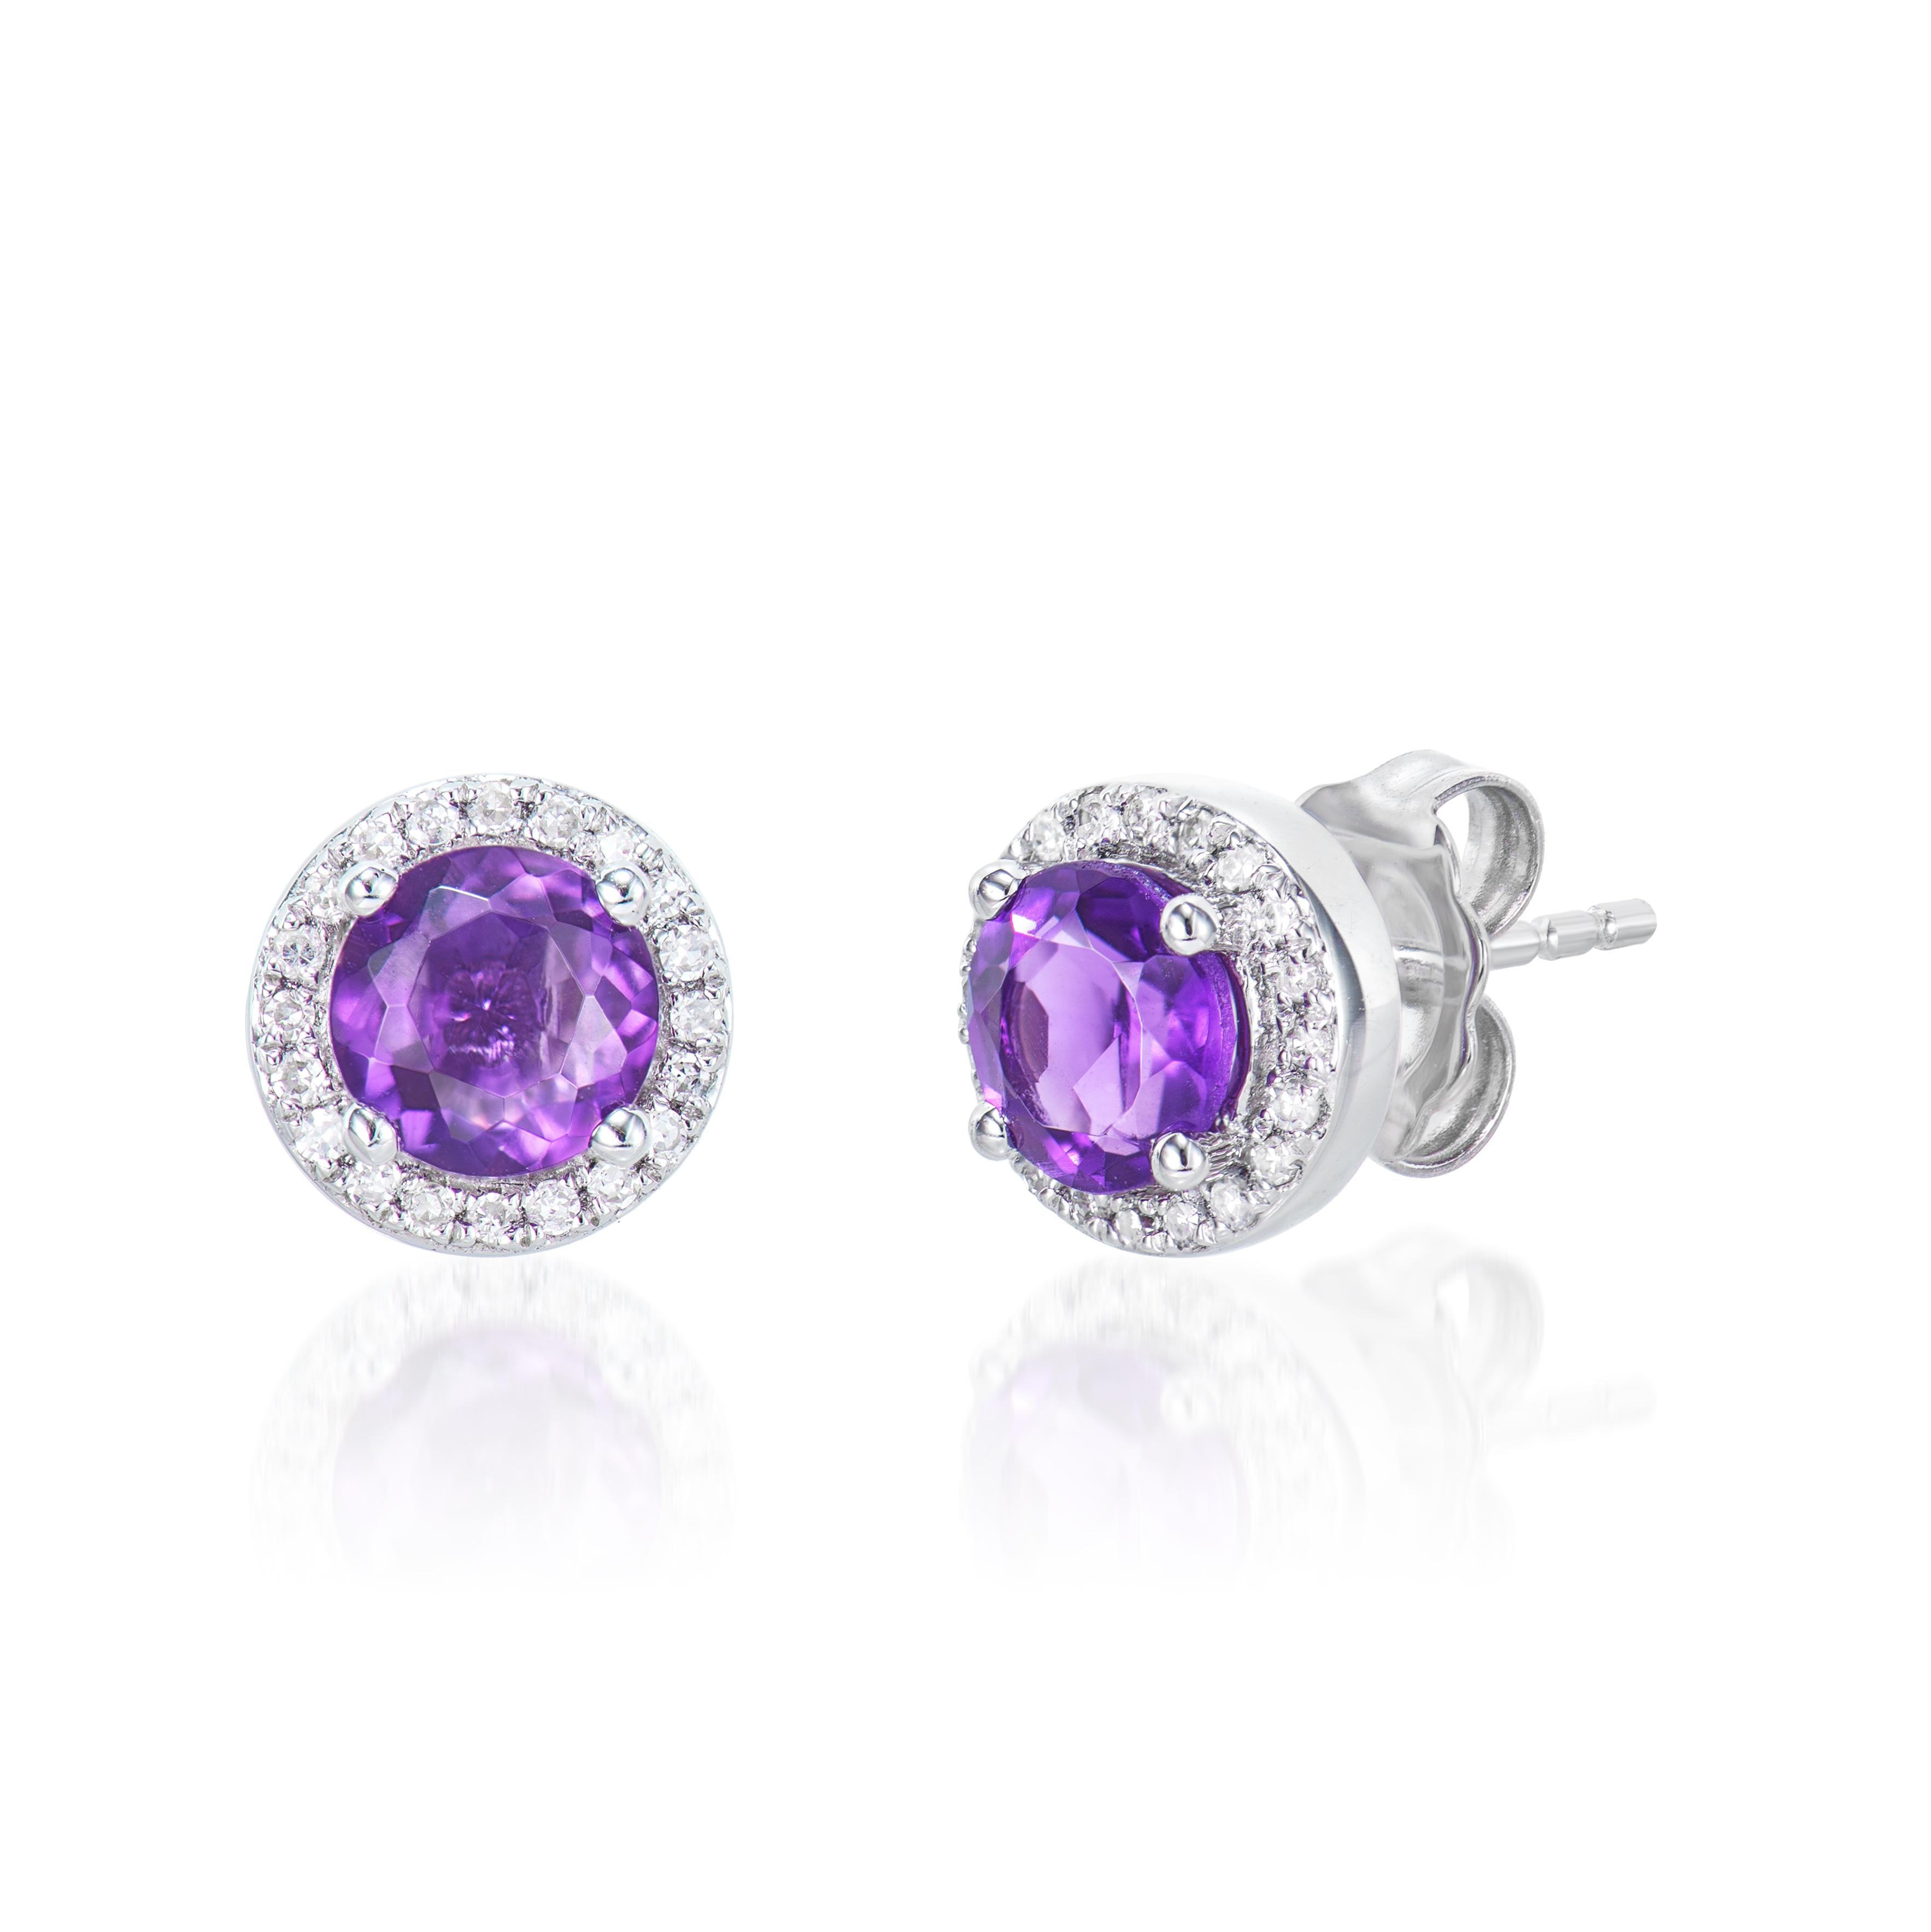 Round Cut 0.80 Carat Amethyst Stud Earrings in 18Karat White Gold with White Diamond. For Sale